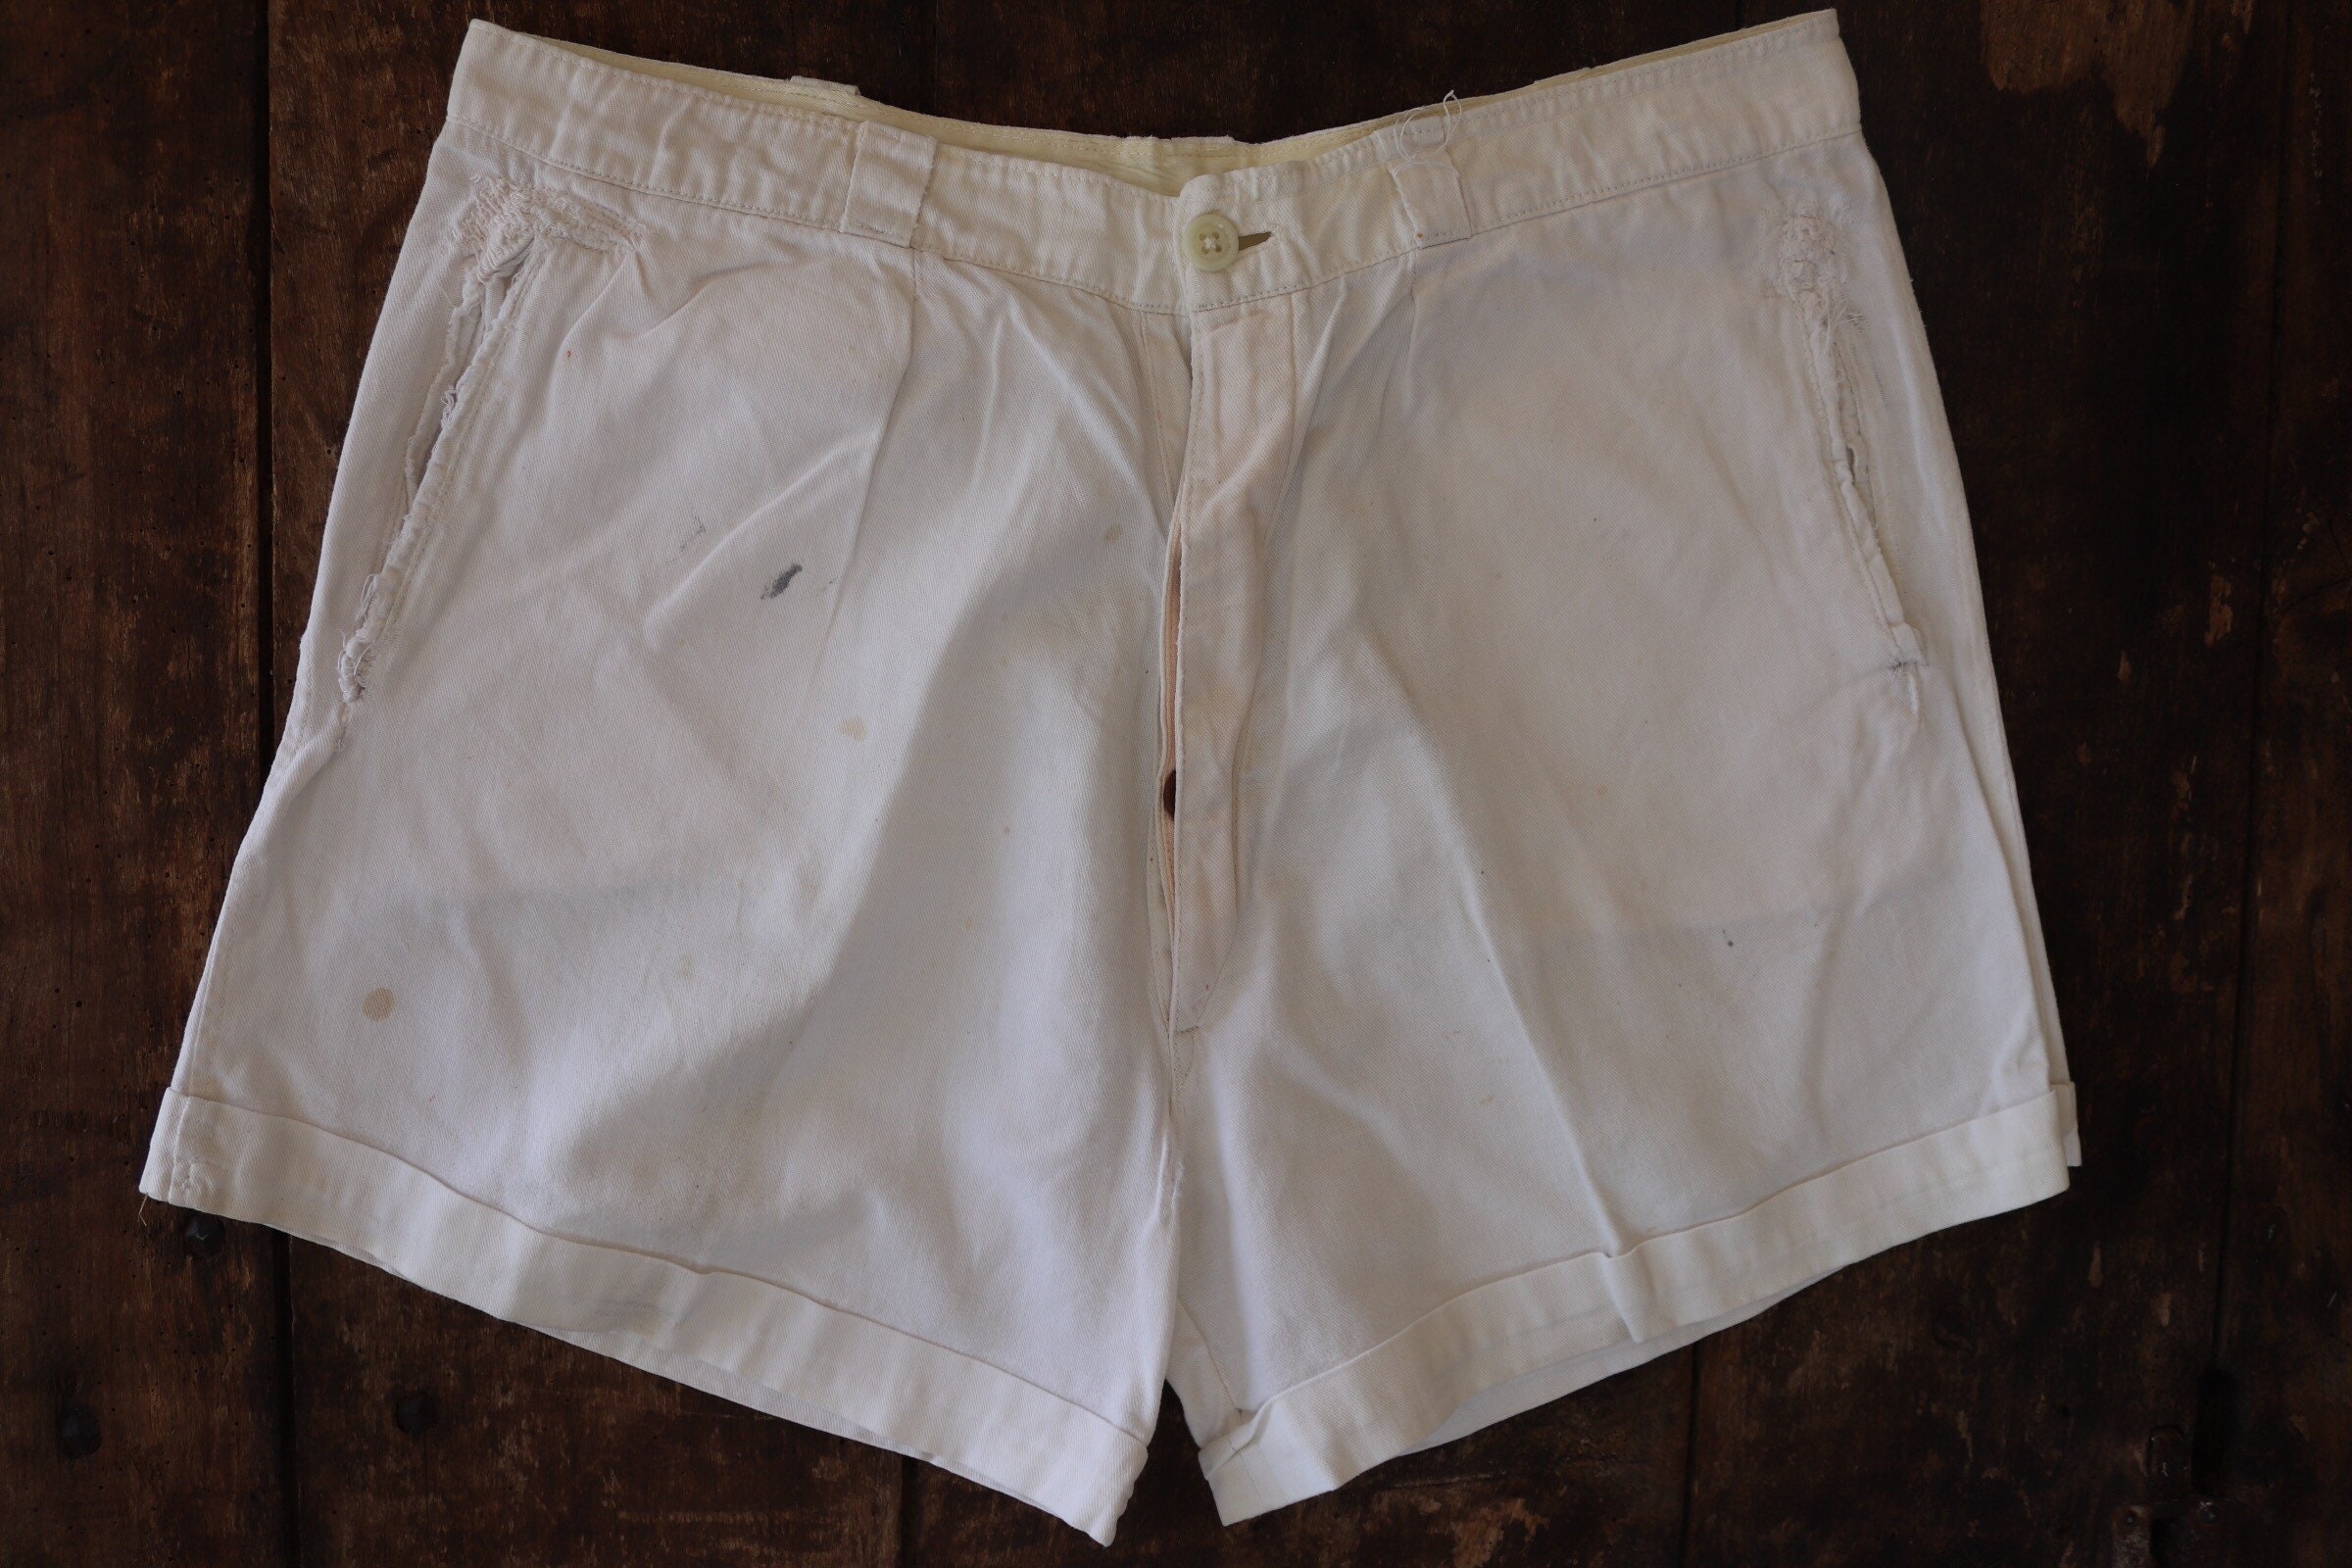 Vintage 1940s 40s 1950s 50s french army military white cotton boxer shorts  underwear pants 30 31 waist (1)